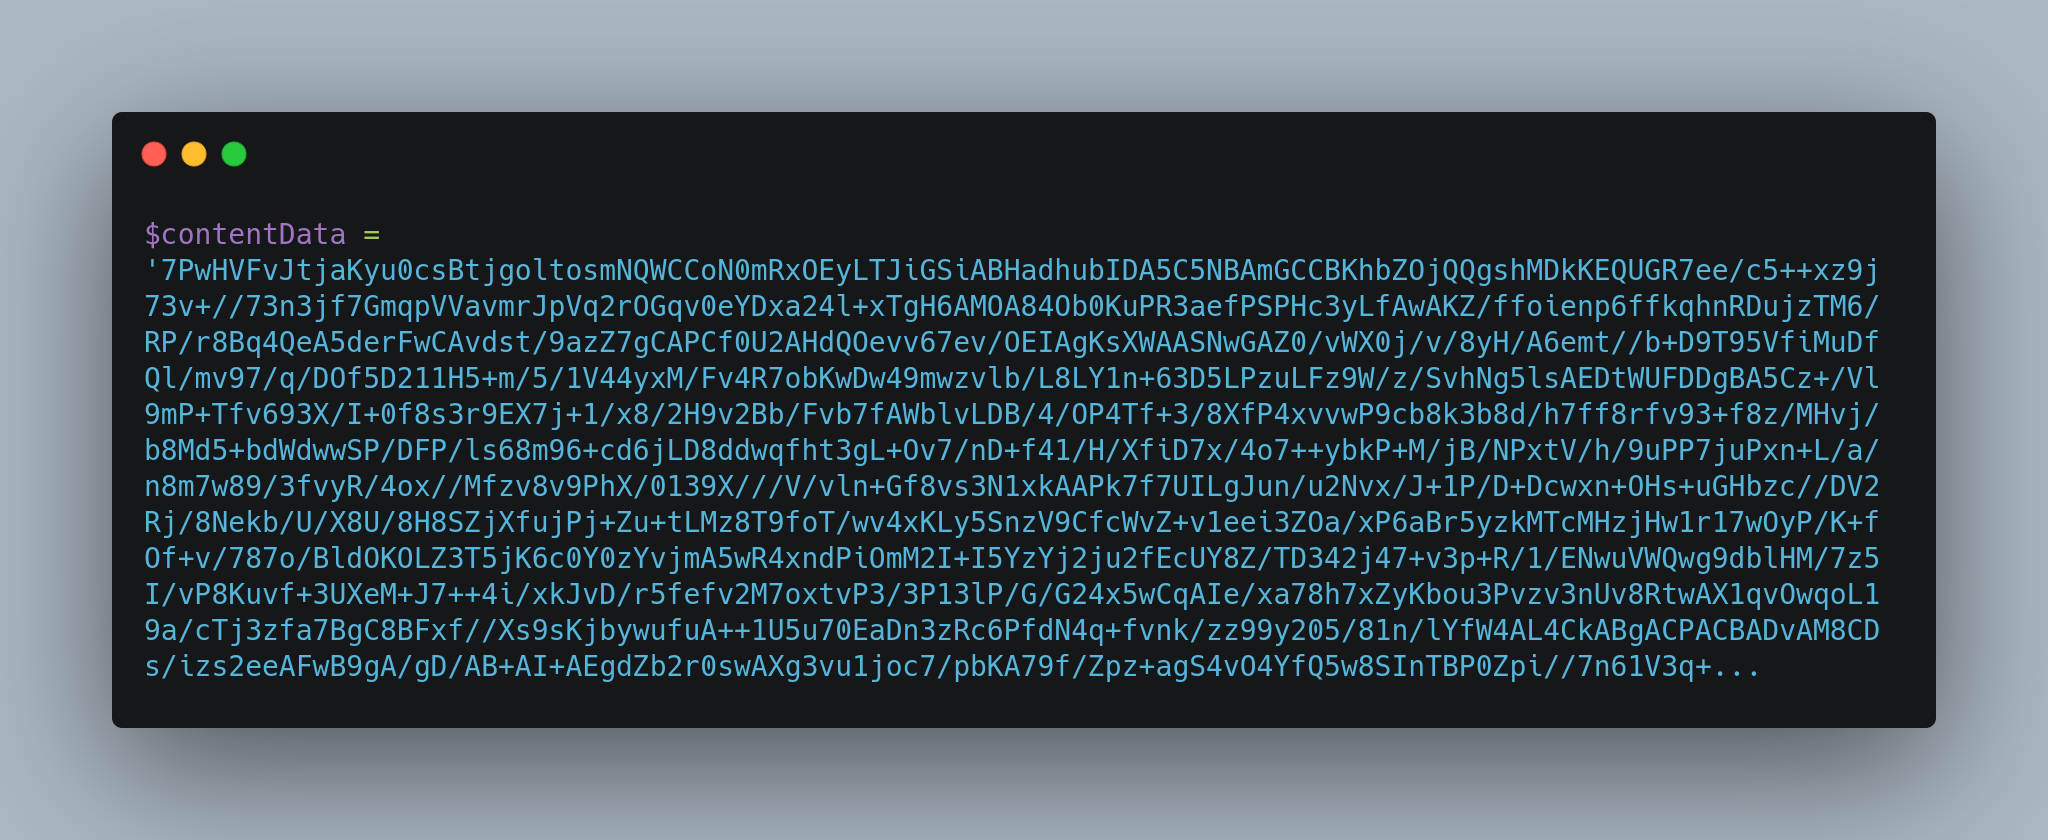 Just few lines of the encoded malicious document